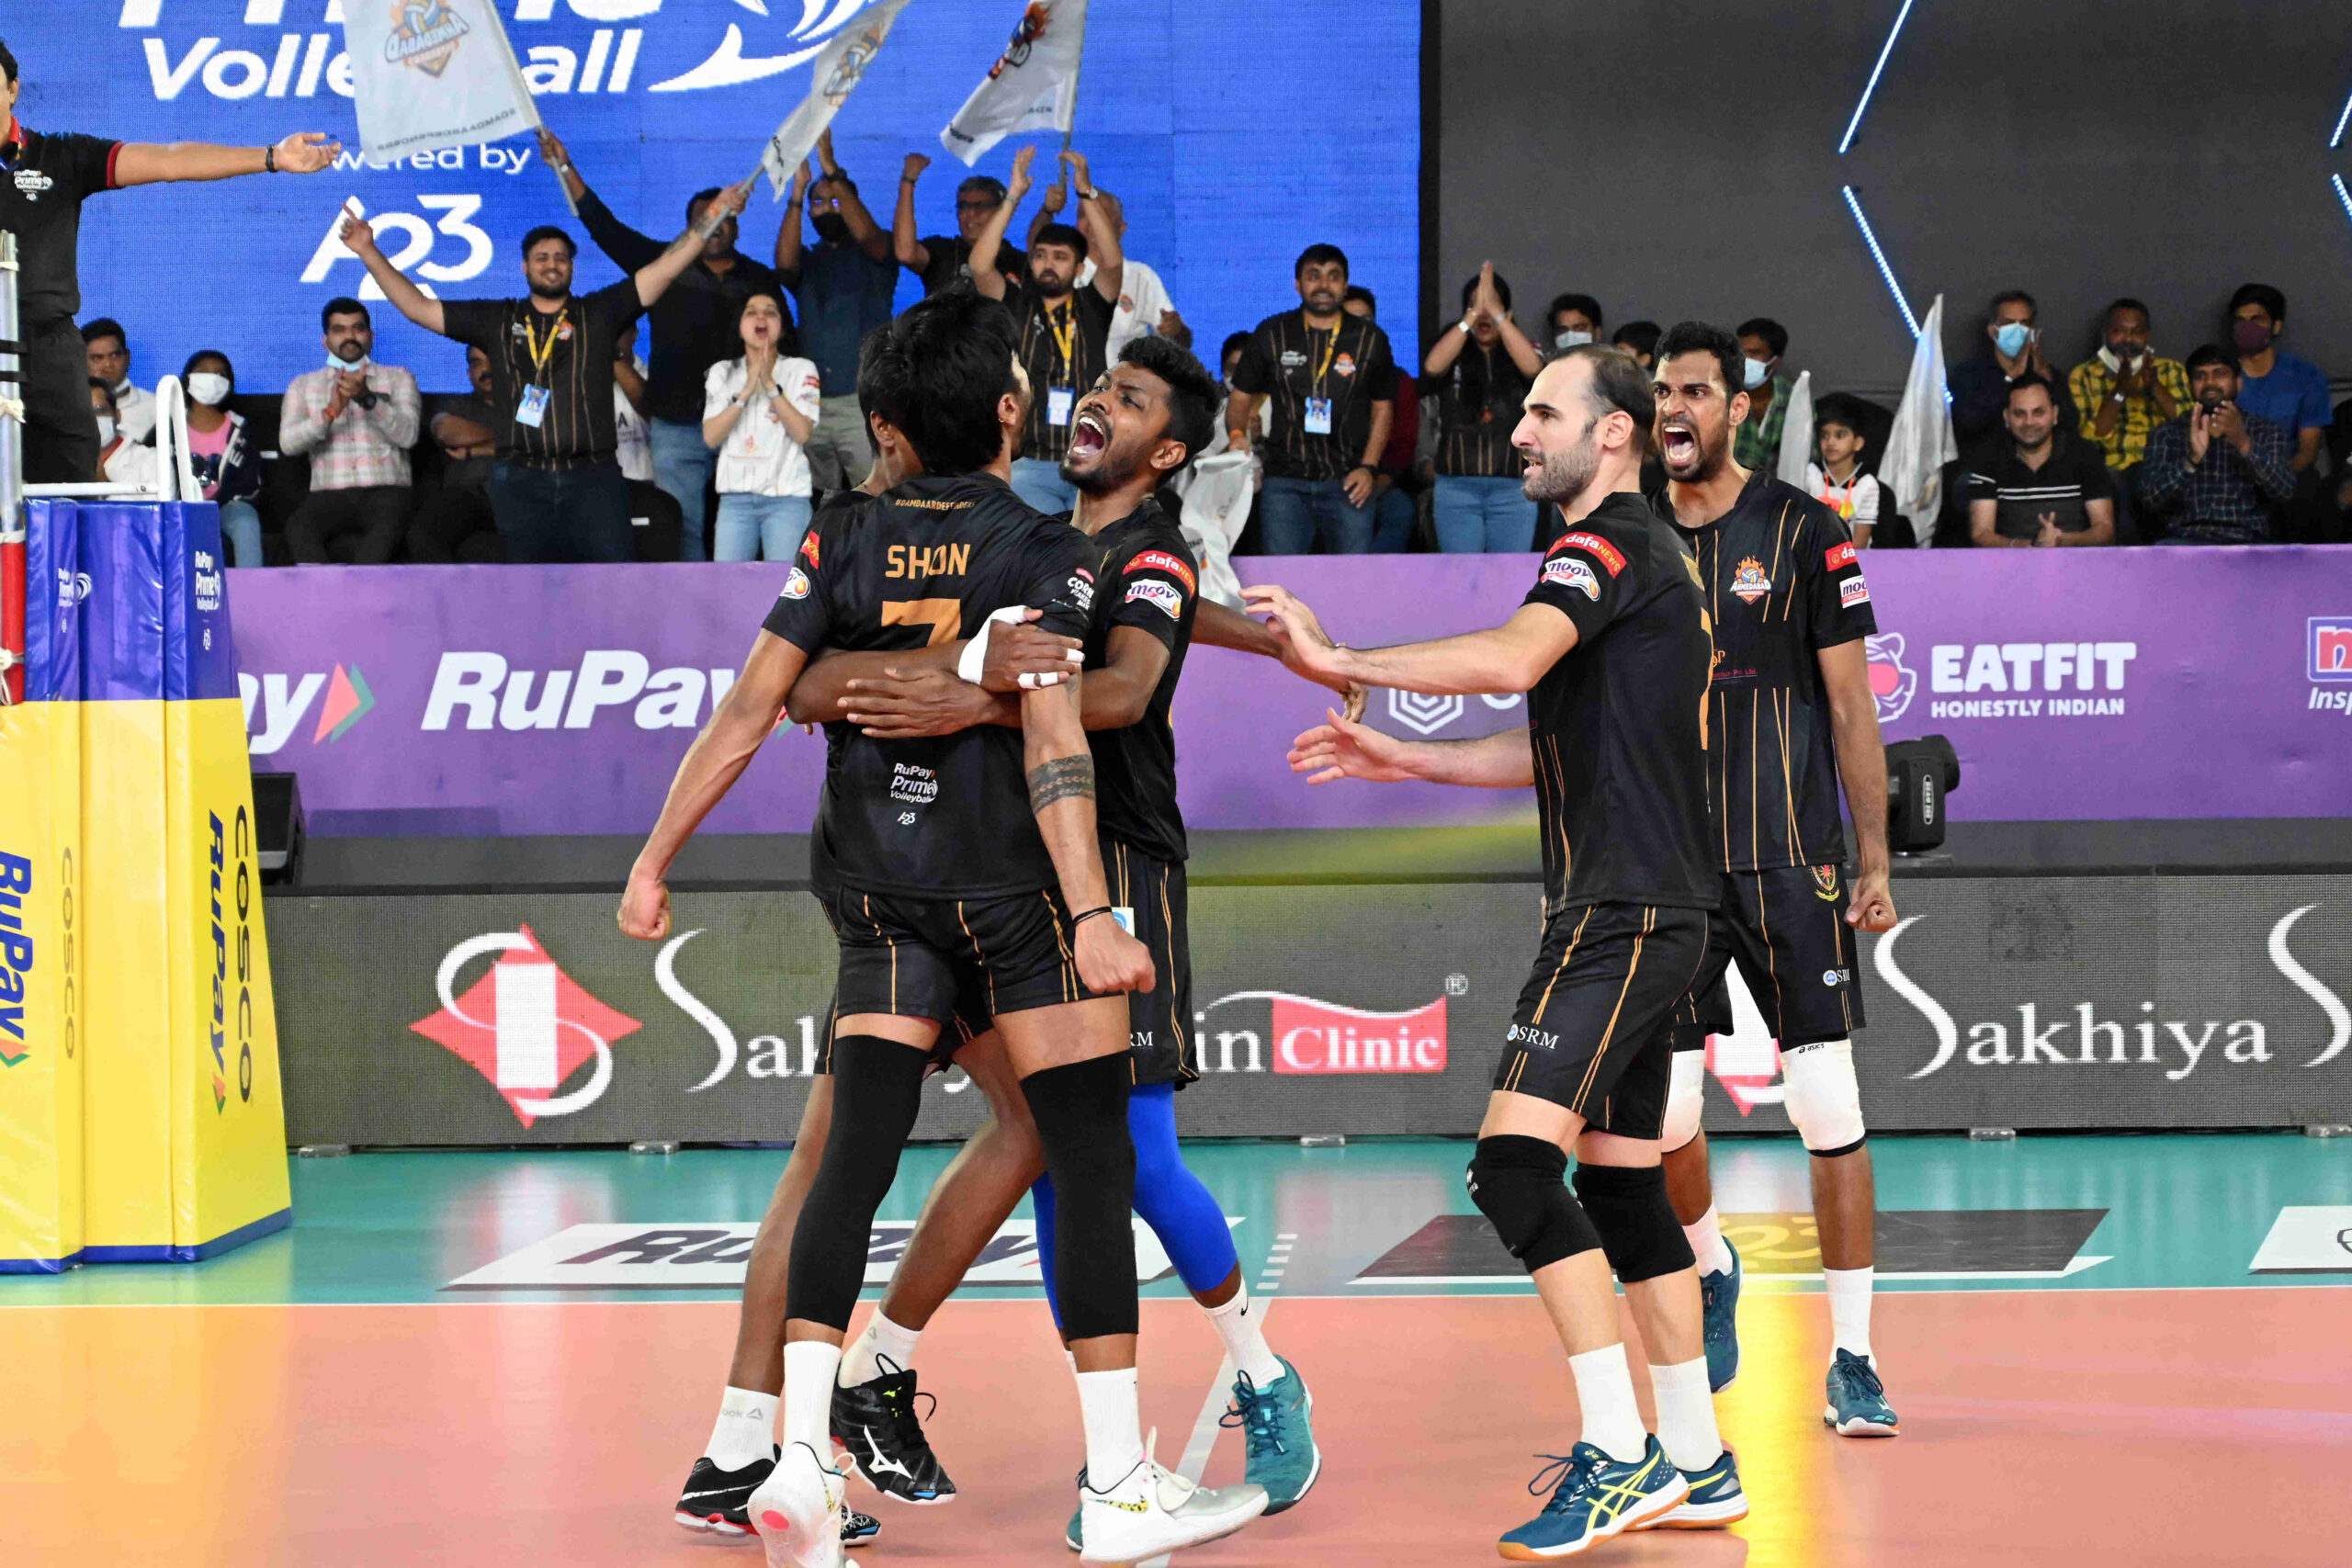  Ahmedabad Defenders defeat Kolkata Thunderbolts to become the first team to reach the Semi-Finals.